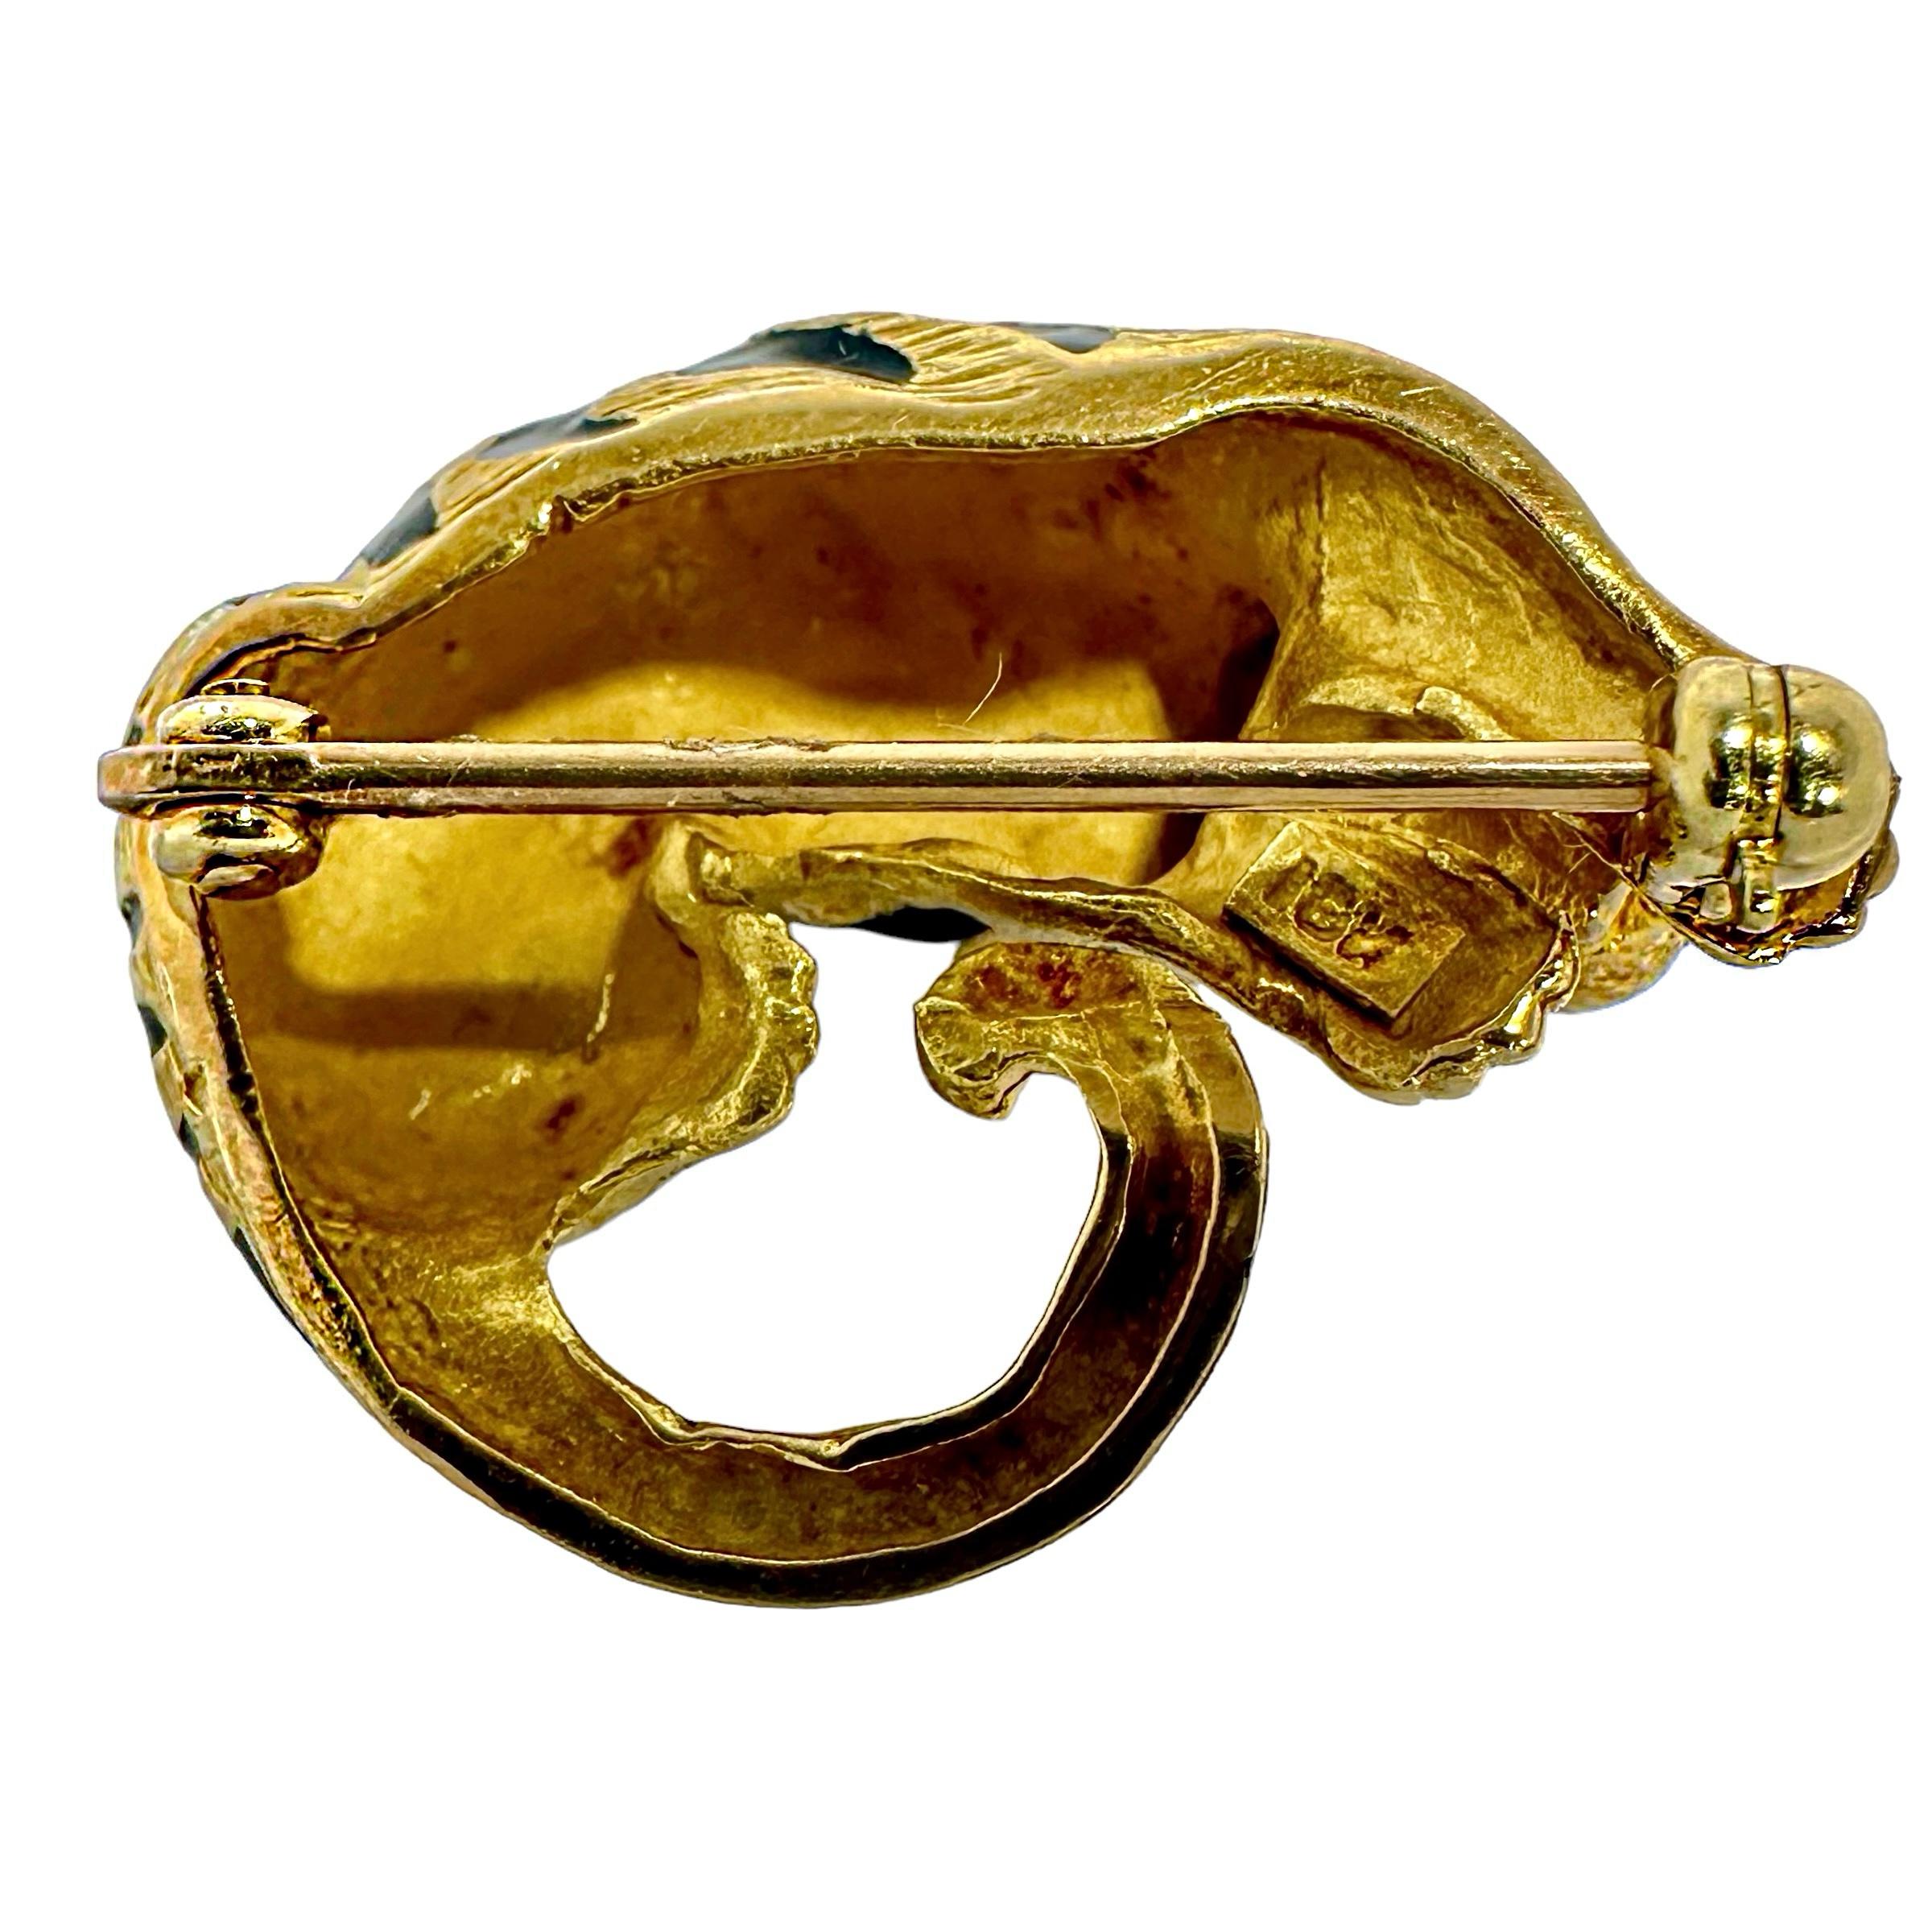 Diminutive, Lifelike, Yellow Gold Tiger Brooch with Enamel & Bright Emerald Eyes In Good Condition For Sale In Palm Beach, FL